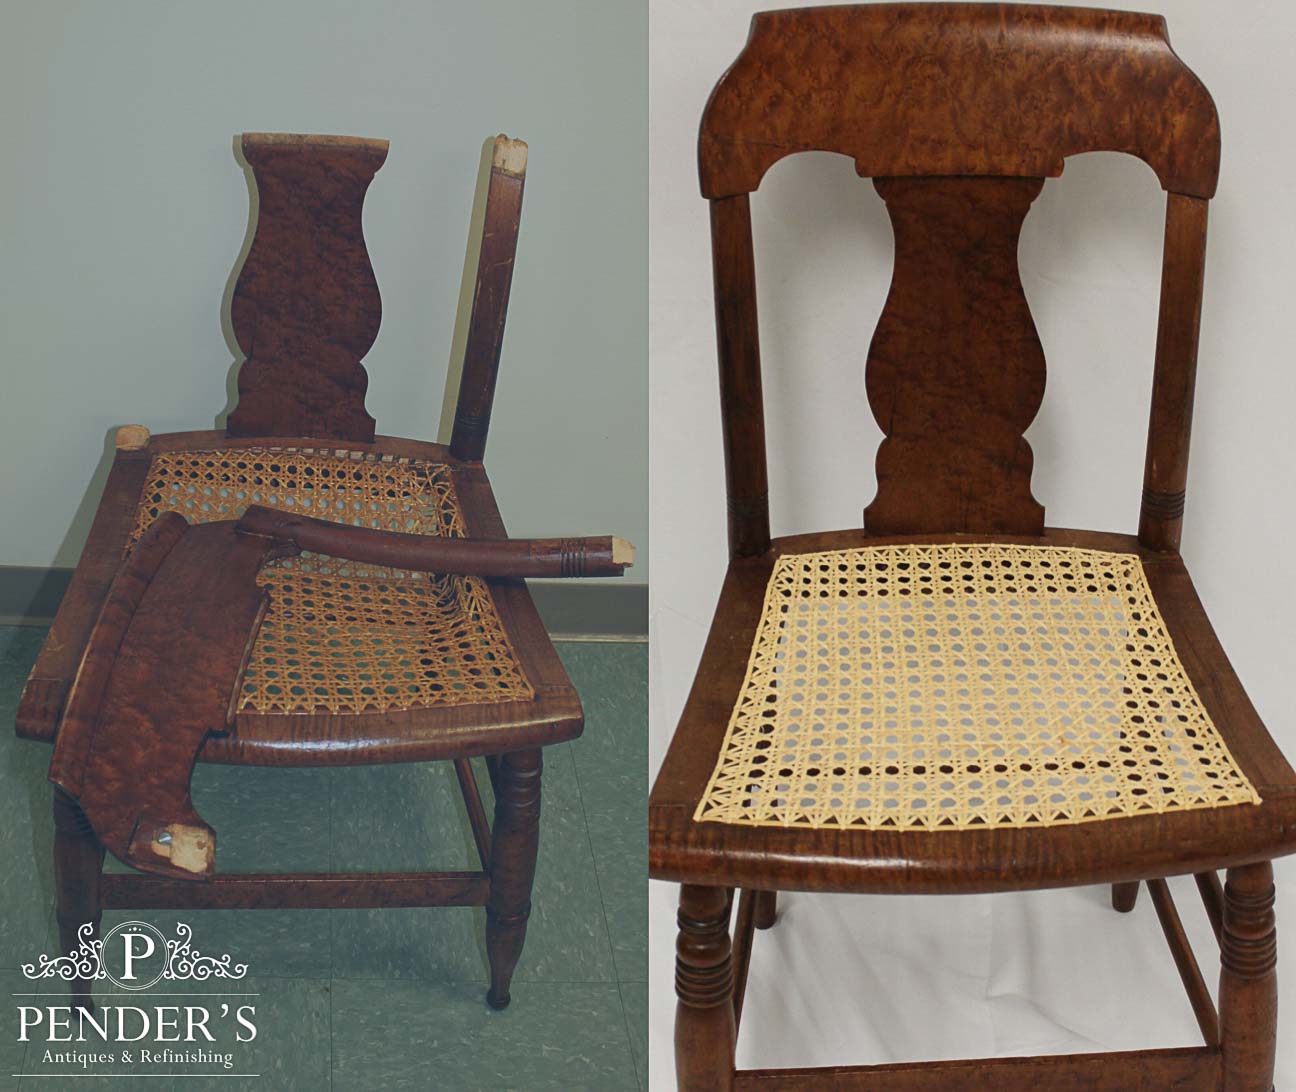 Before and after repair of a broken wooden chair back